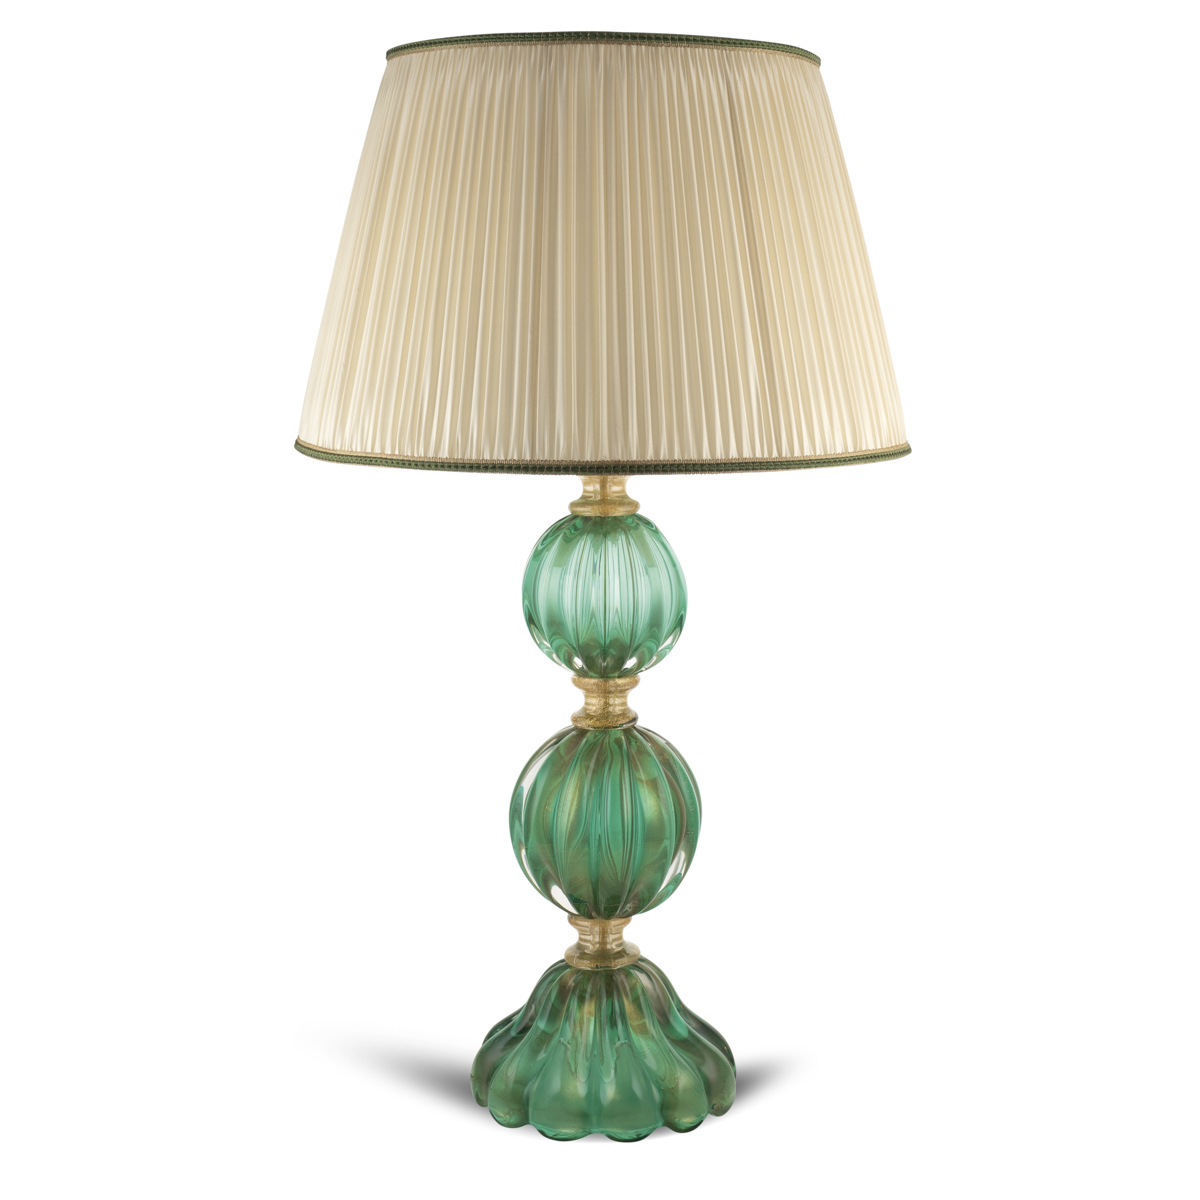 Green and gold Murano glass table lamp 20th century h. 93,5 cm.